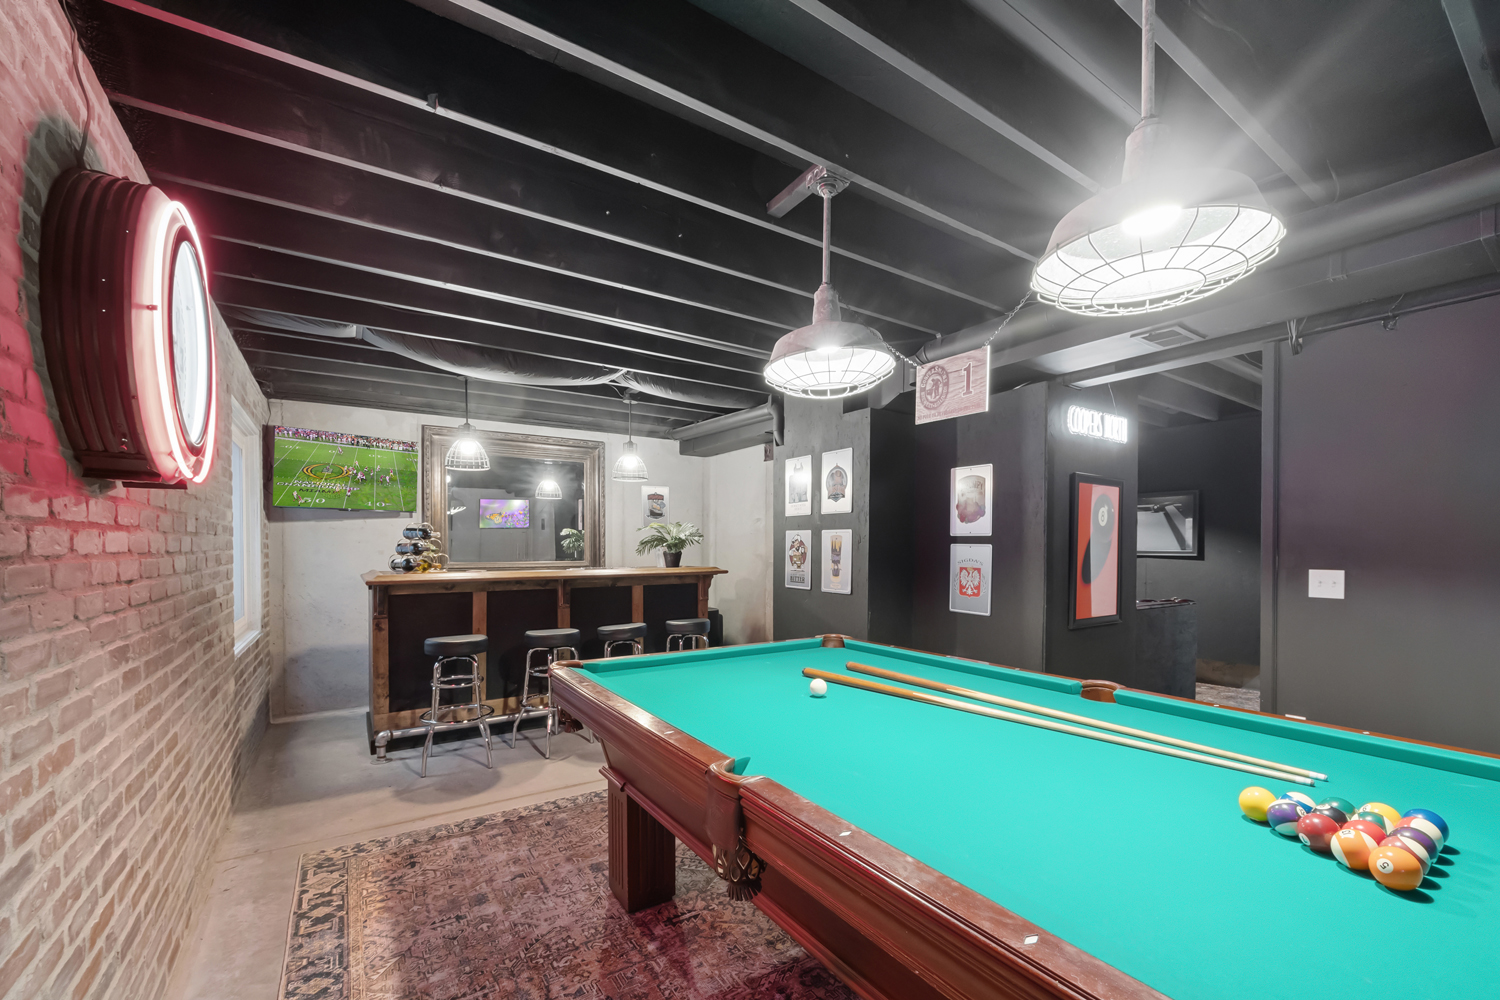 Coopers North Game Room | Pool Table Repurposed from CooperSmiths!